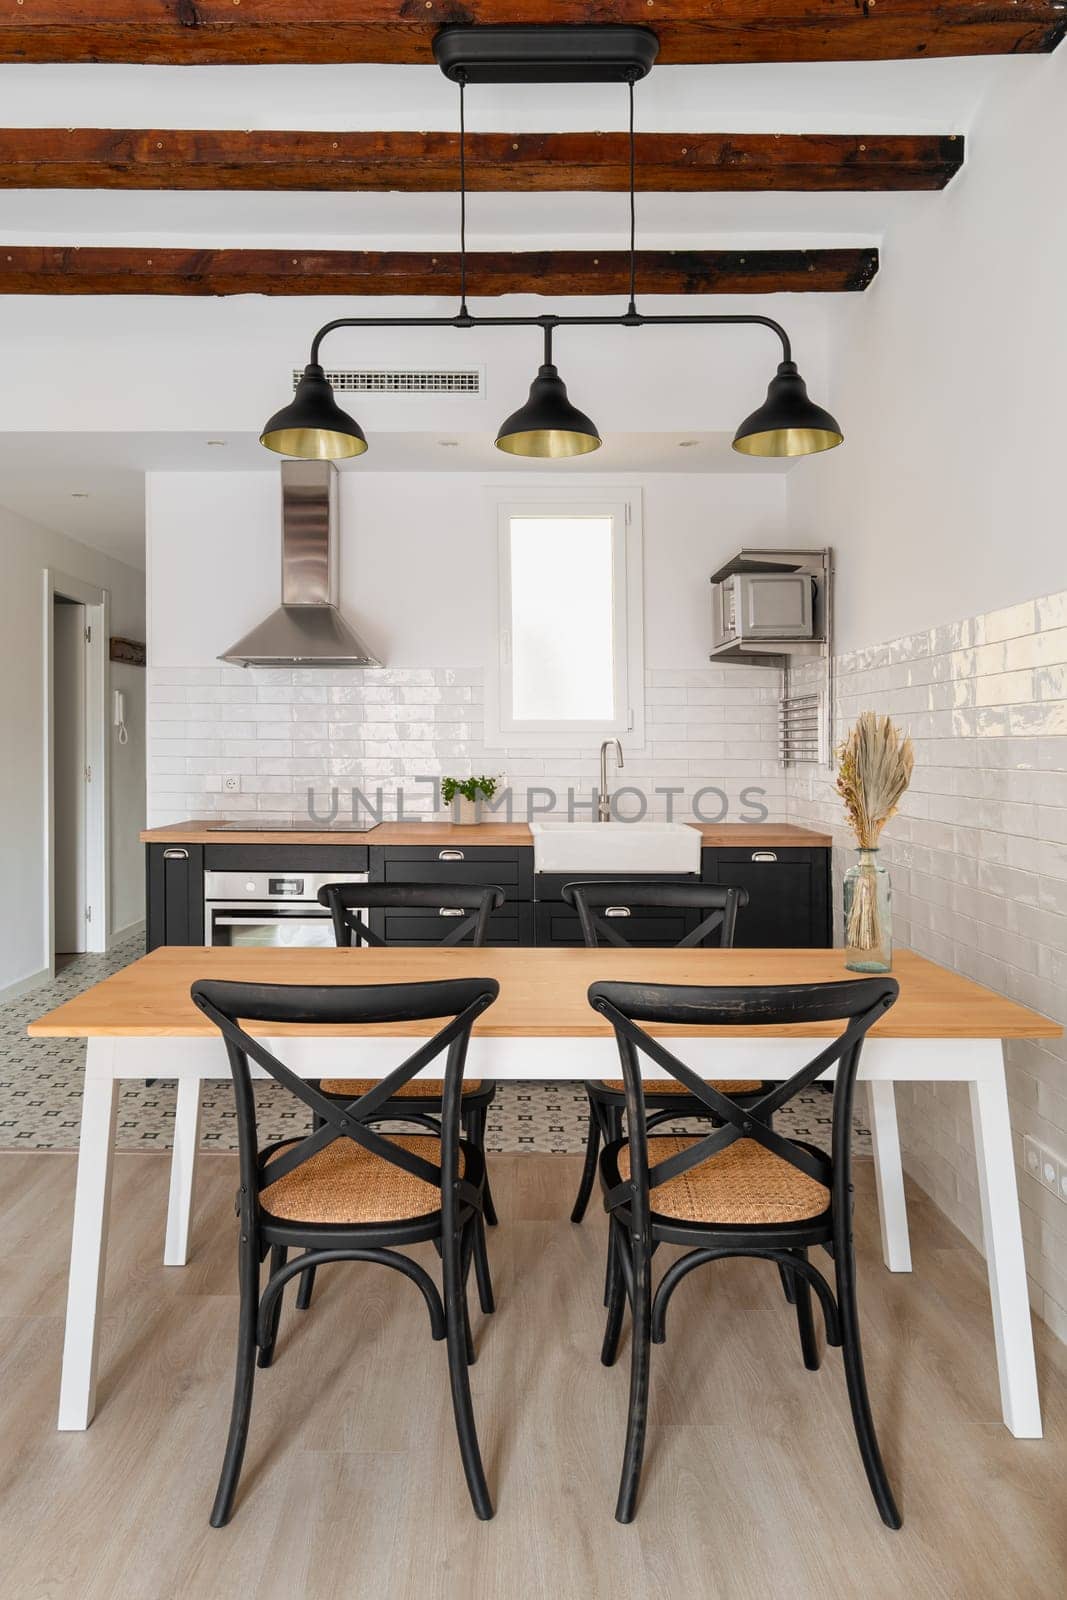 Dining table under vintage chandelier in studio apartment kitchen zone. Comfortable interior of minimalist cooking area in residential house